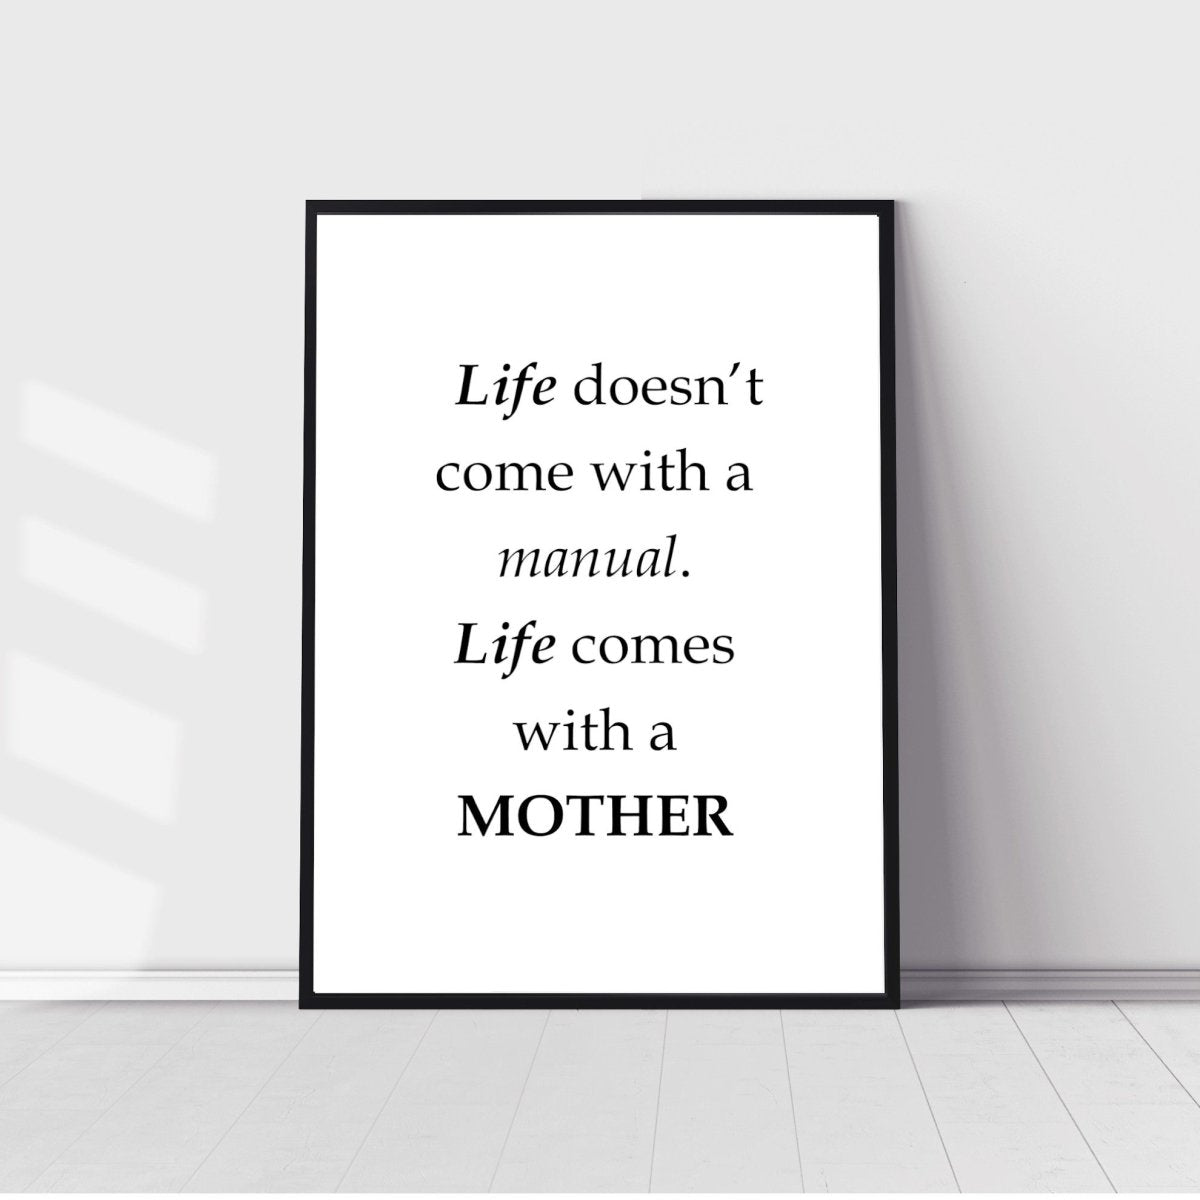 Plakat om graviditet "Life doesn't come with a manual"#BuumpPosterBuump